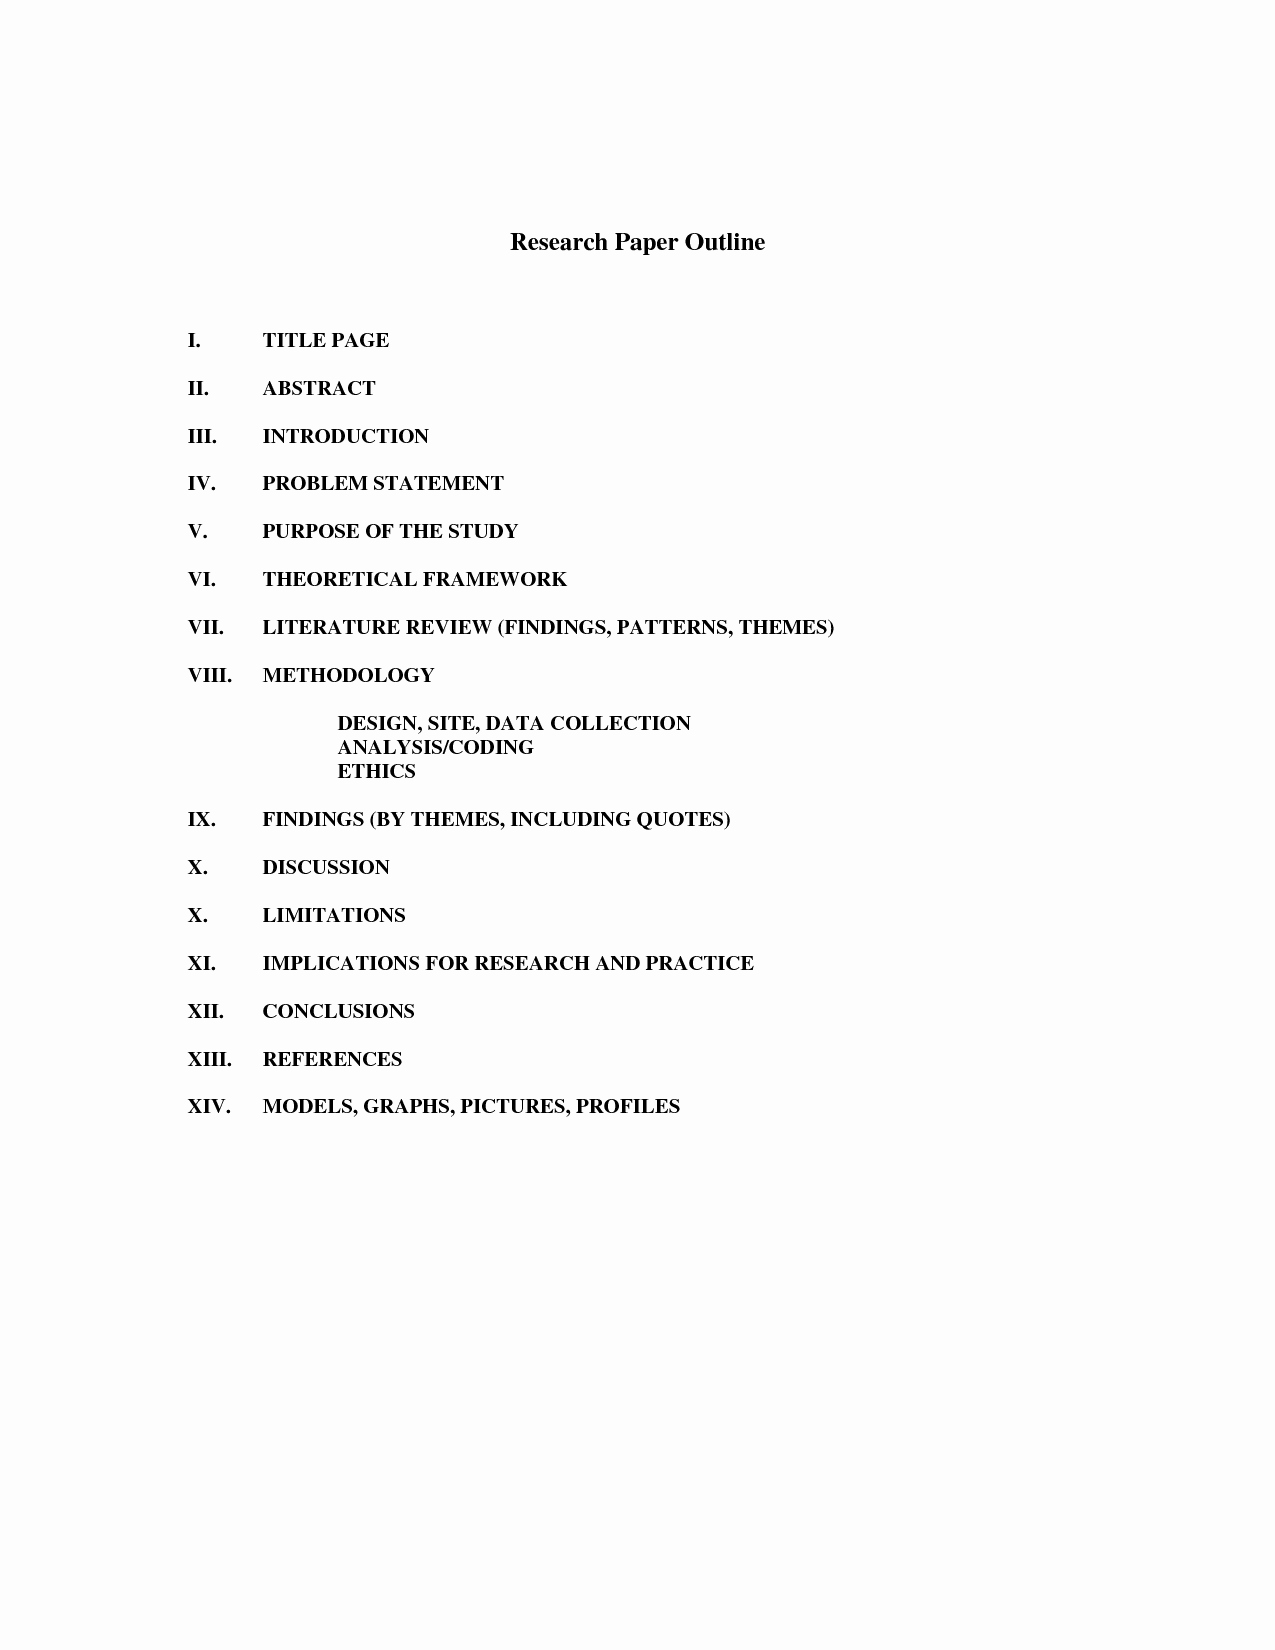 Apa Research Paper Outline Template Luxury Apa Paper Outline Free Download Elsevier social Sciences